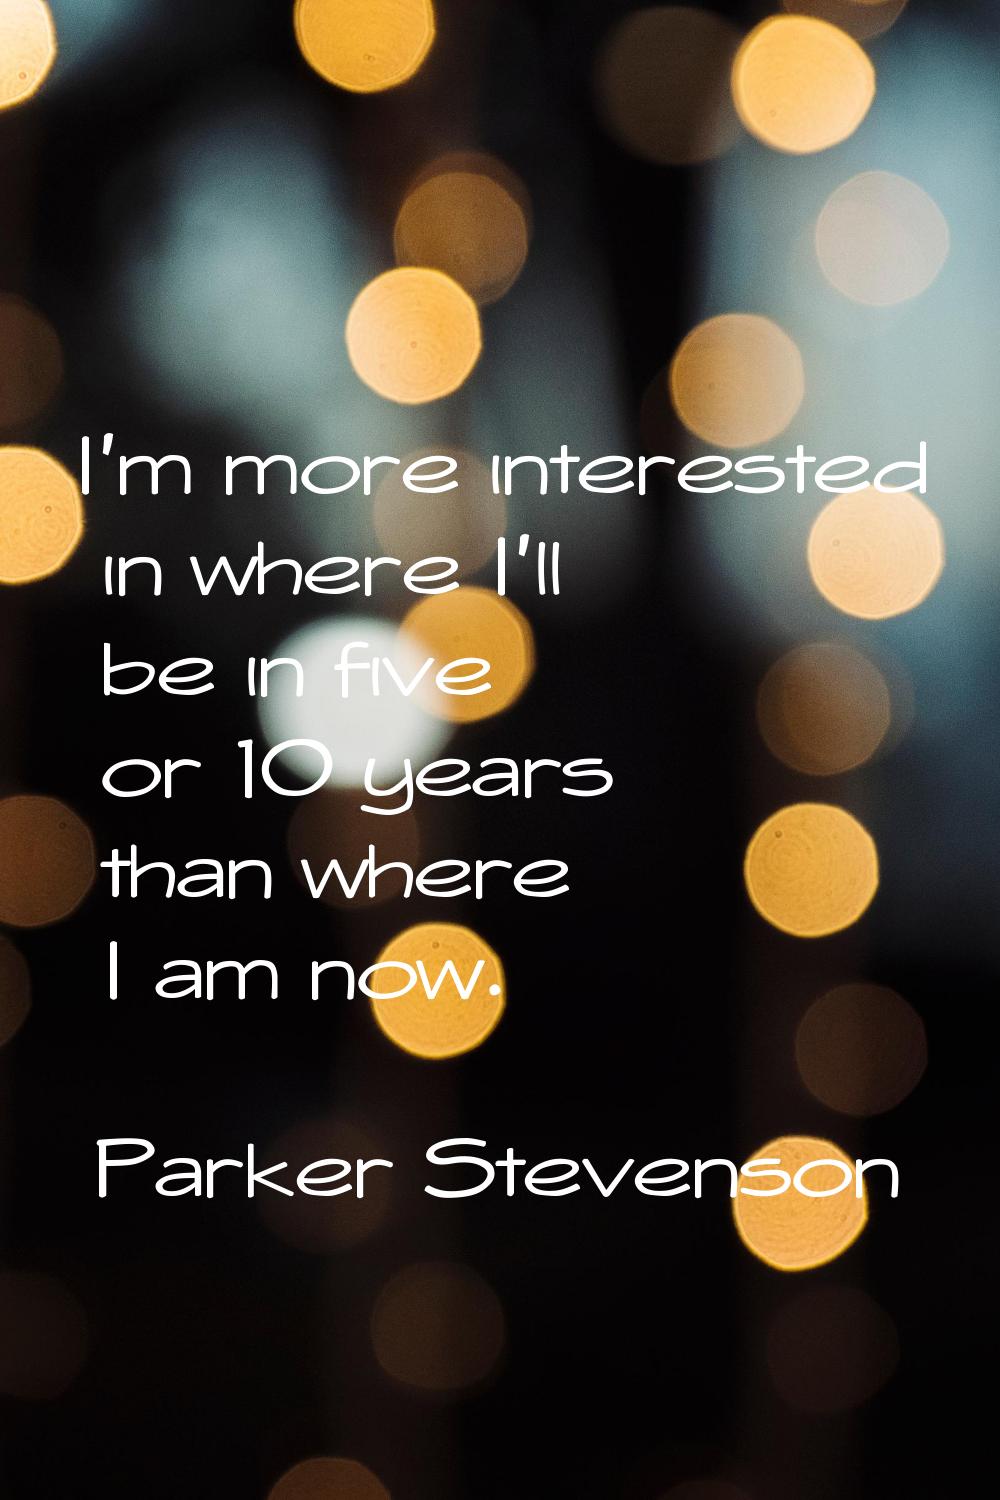 I'm more interested in where I'll be in five or 10 years than where I am now.